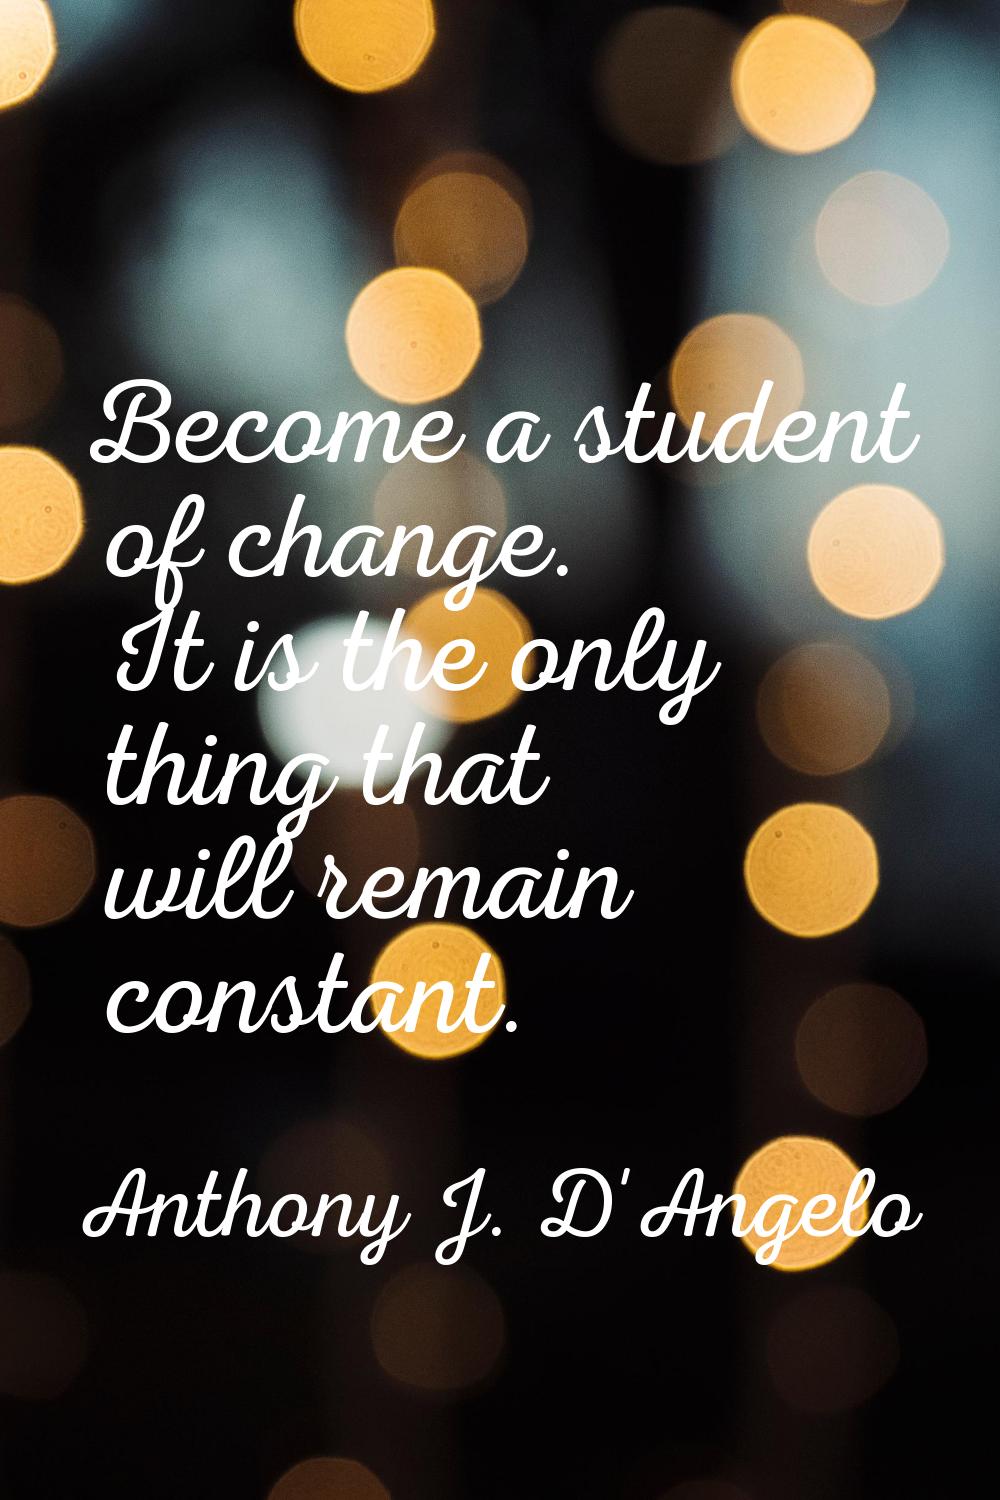 Become a student of change. It is the only thing that will remain constant.